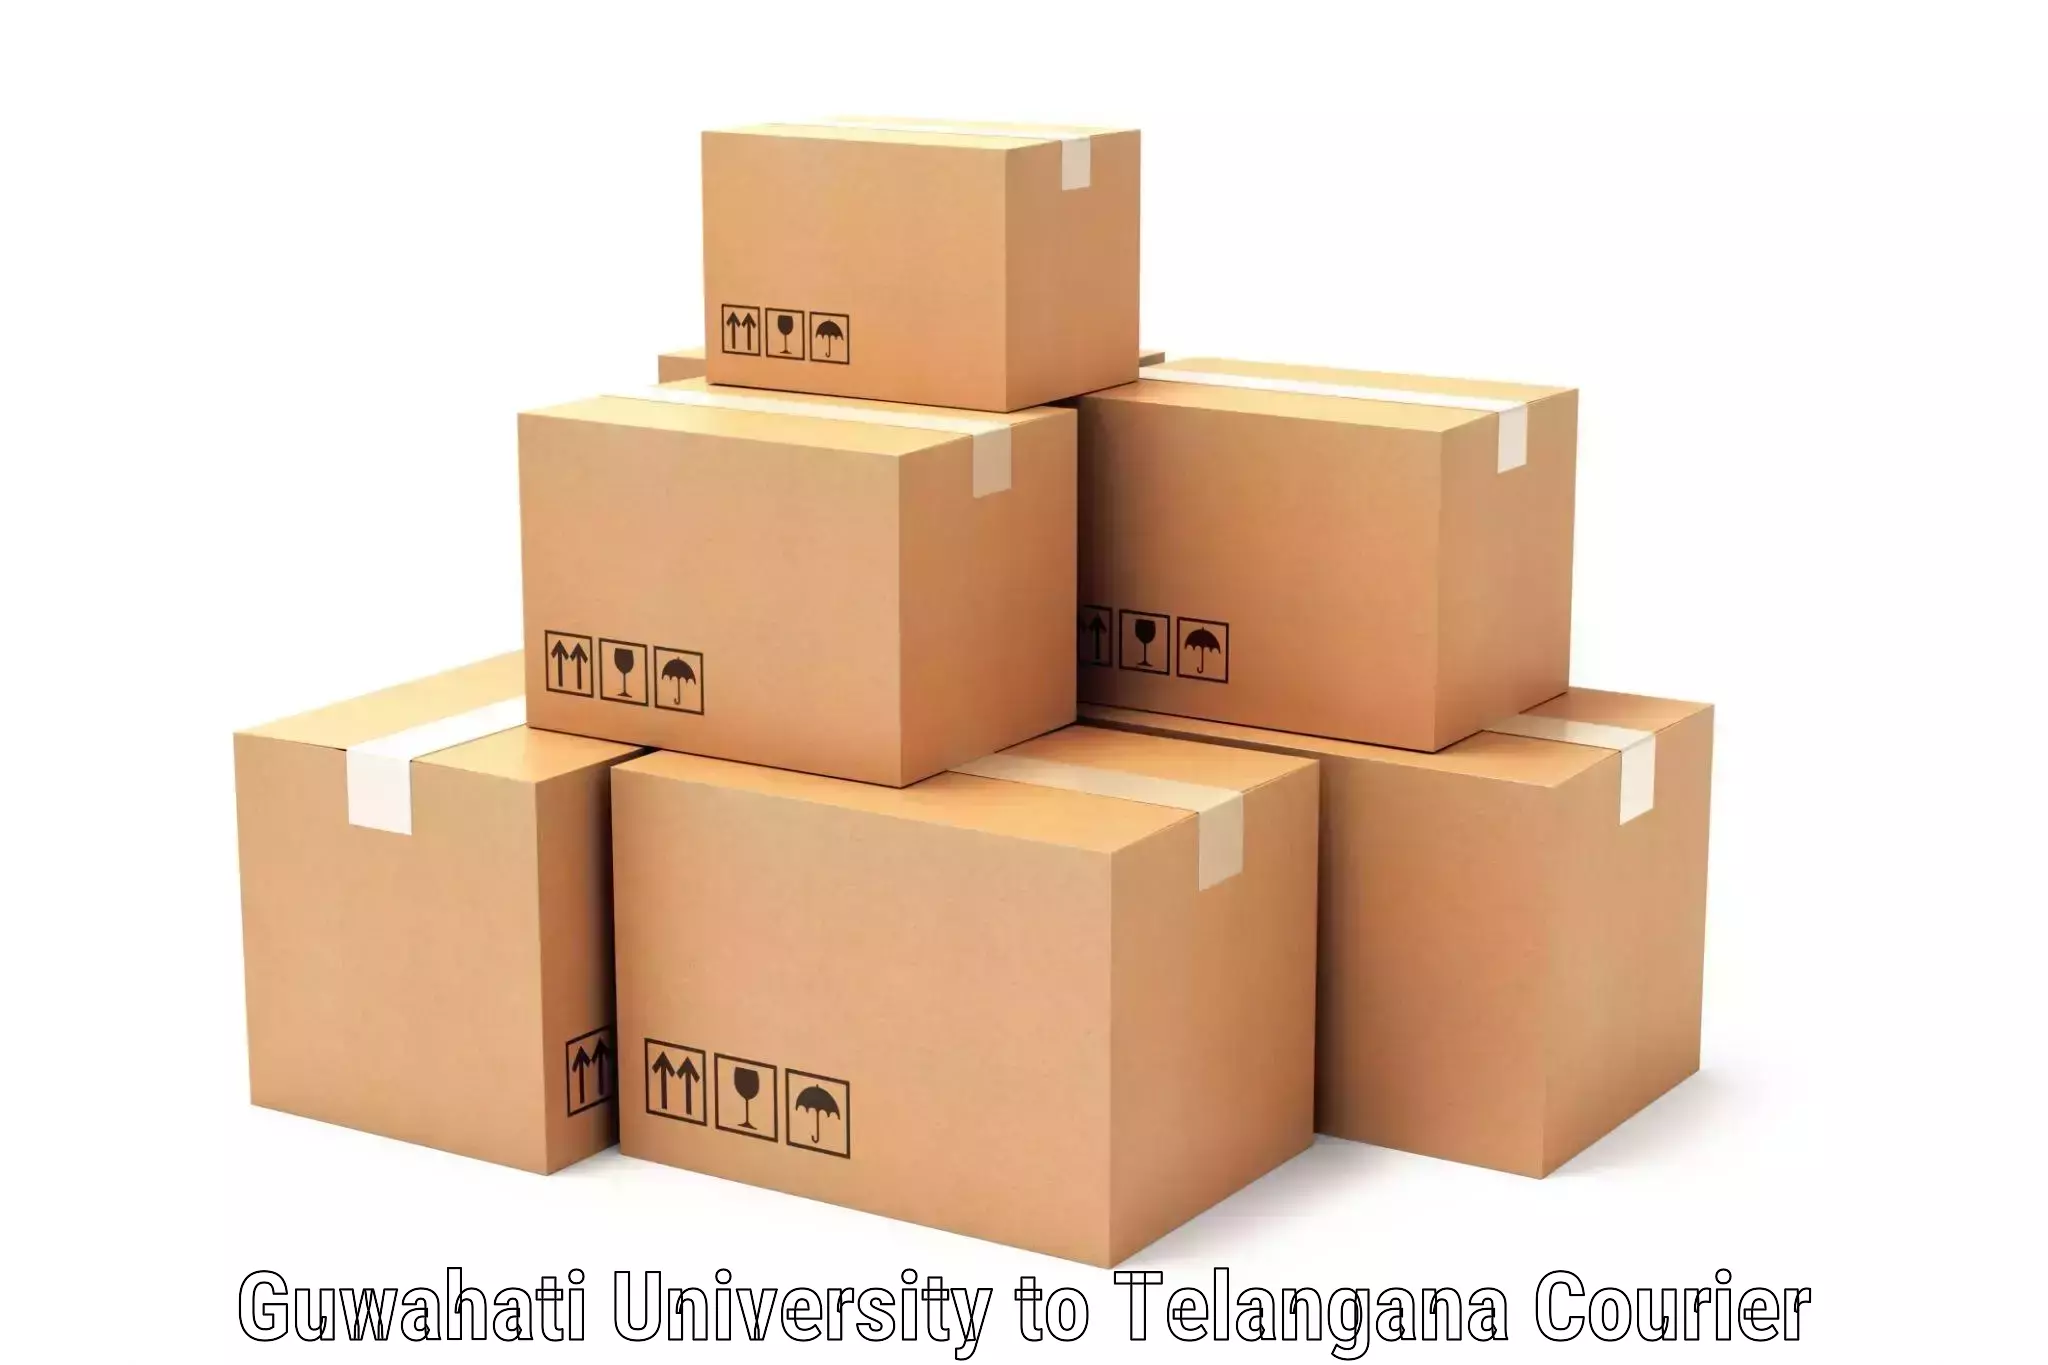 Large-scale shipping solutions in Guwahati University to Telangana